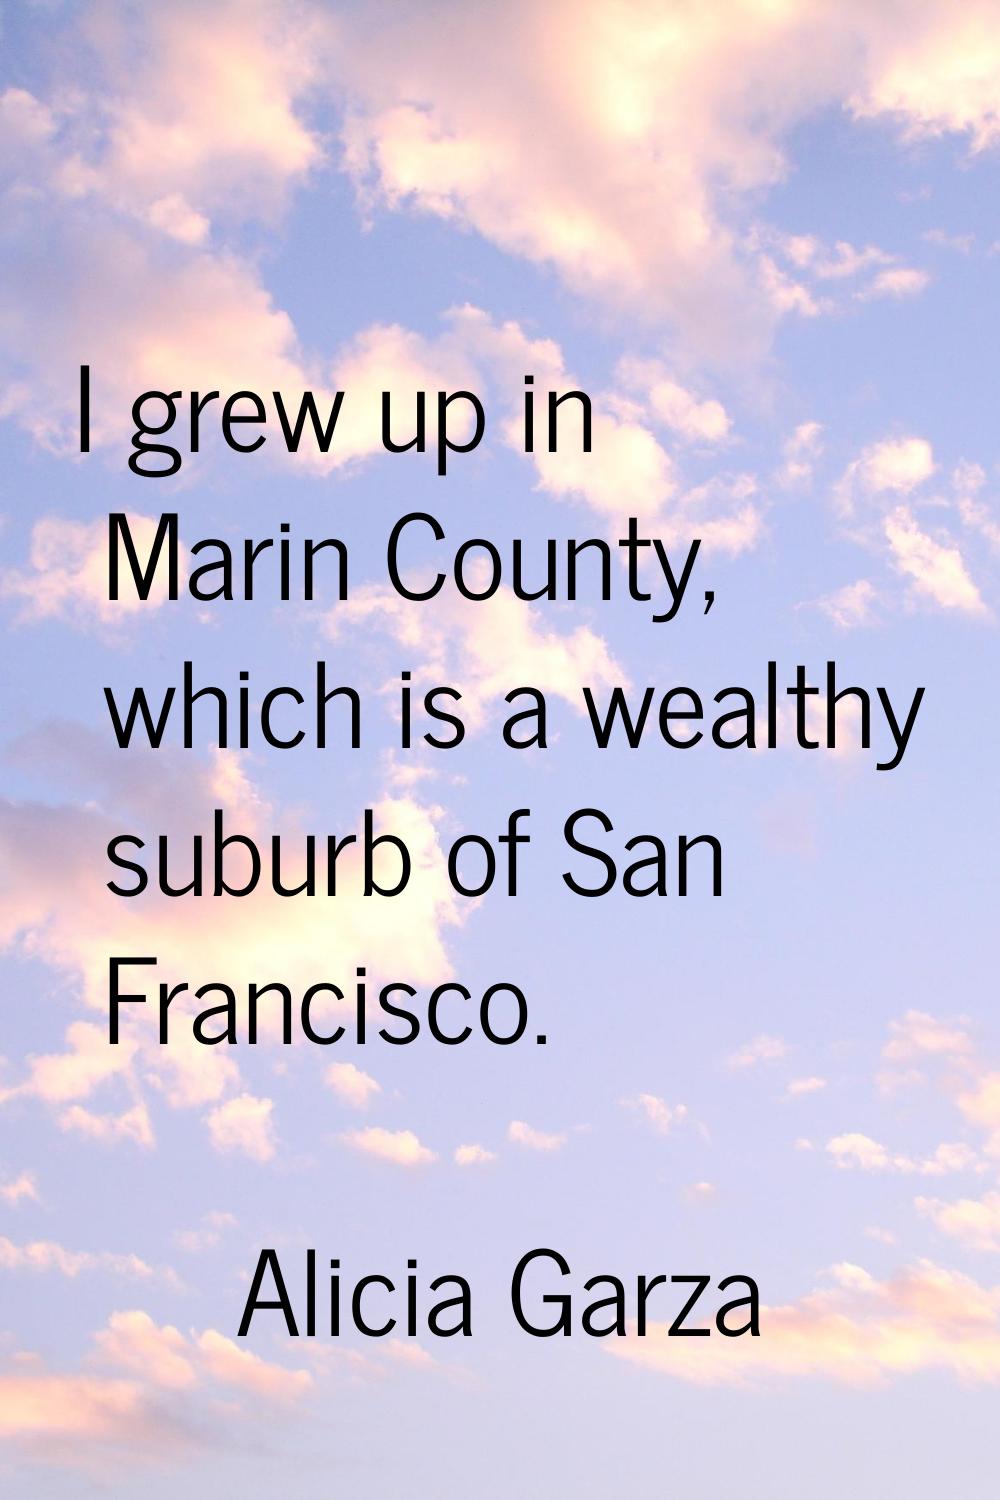 I grew up in Marin County, which is a wealthy suburb of San Francisco.